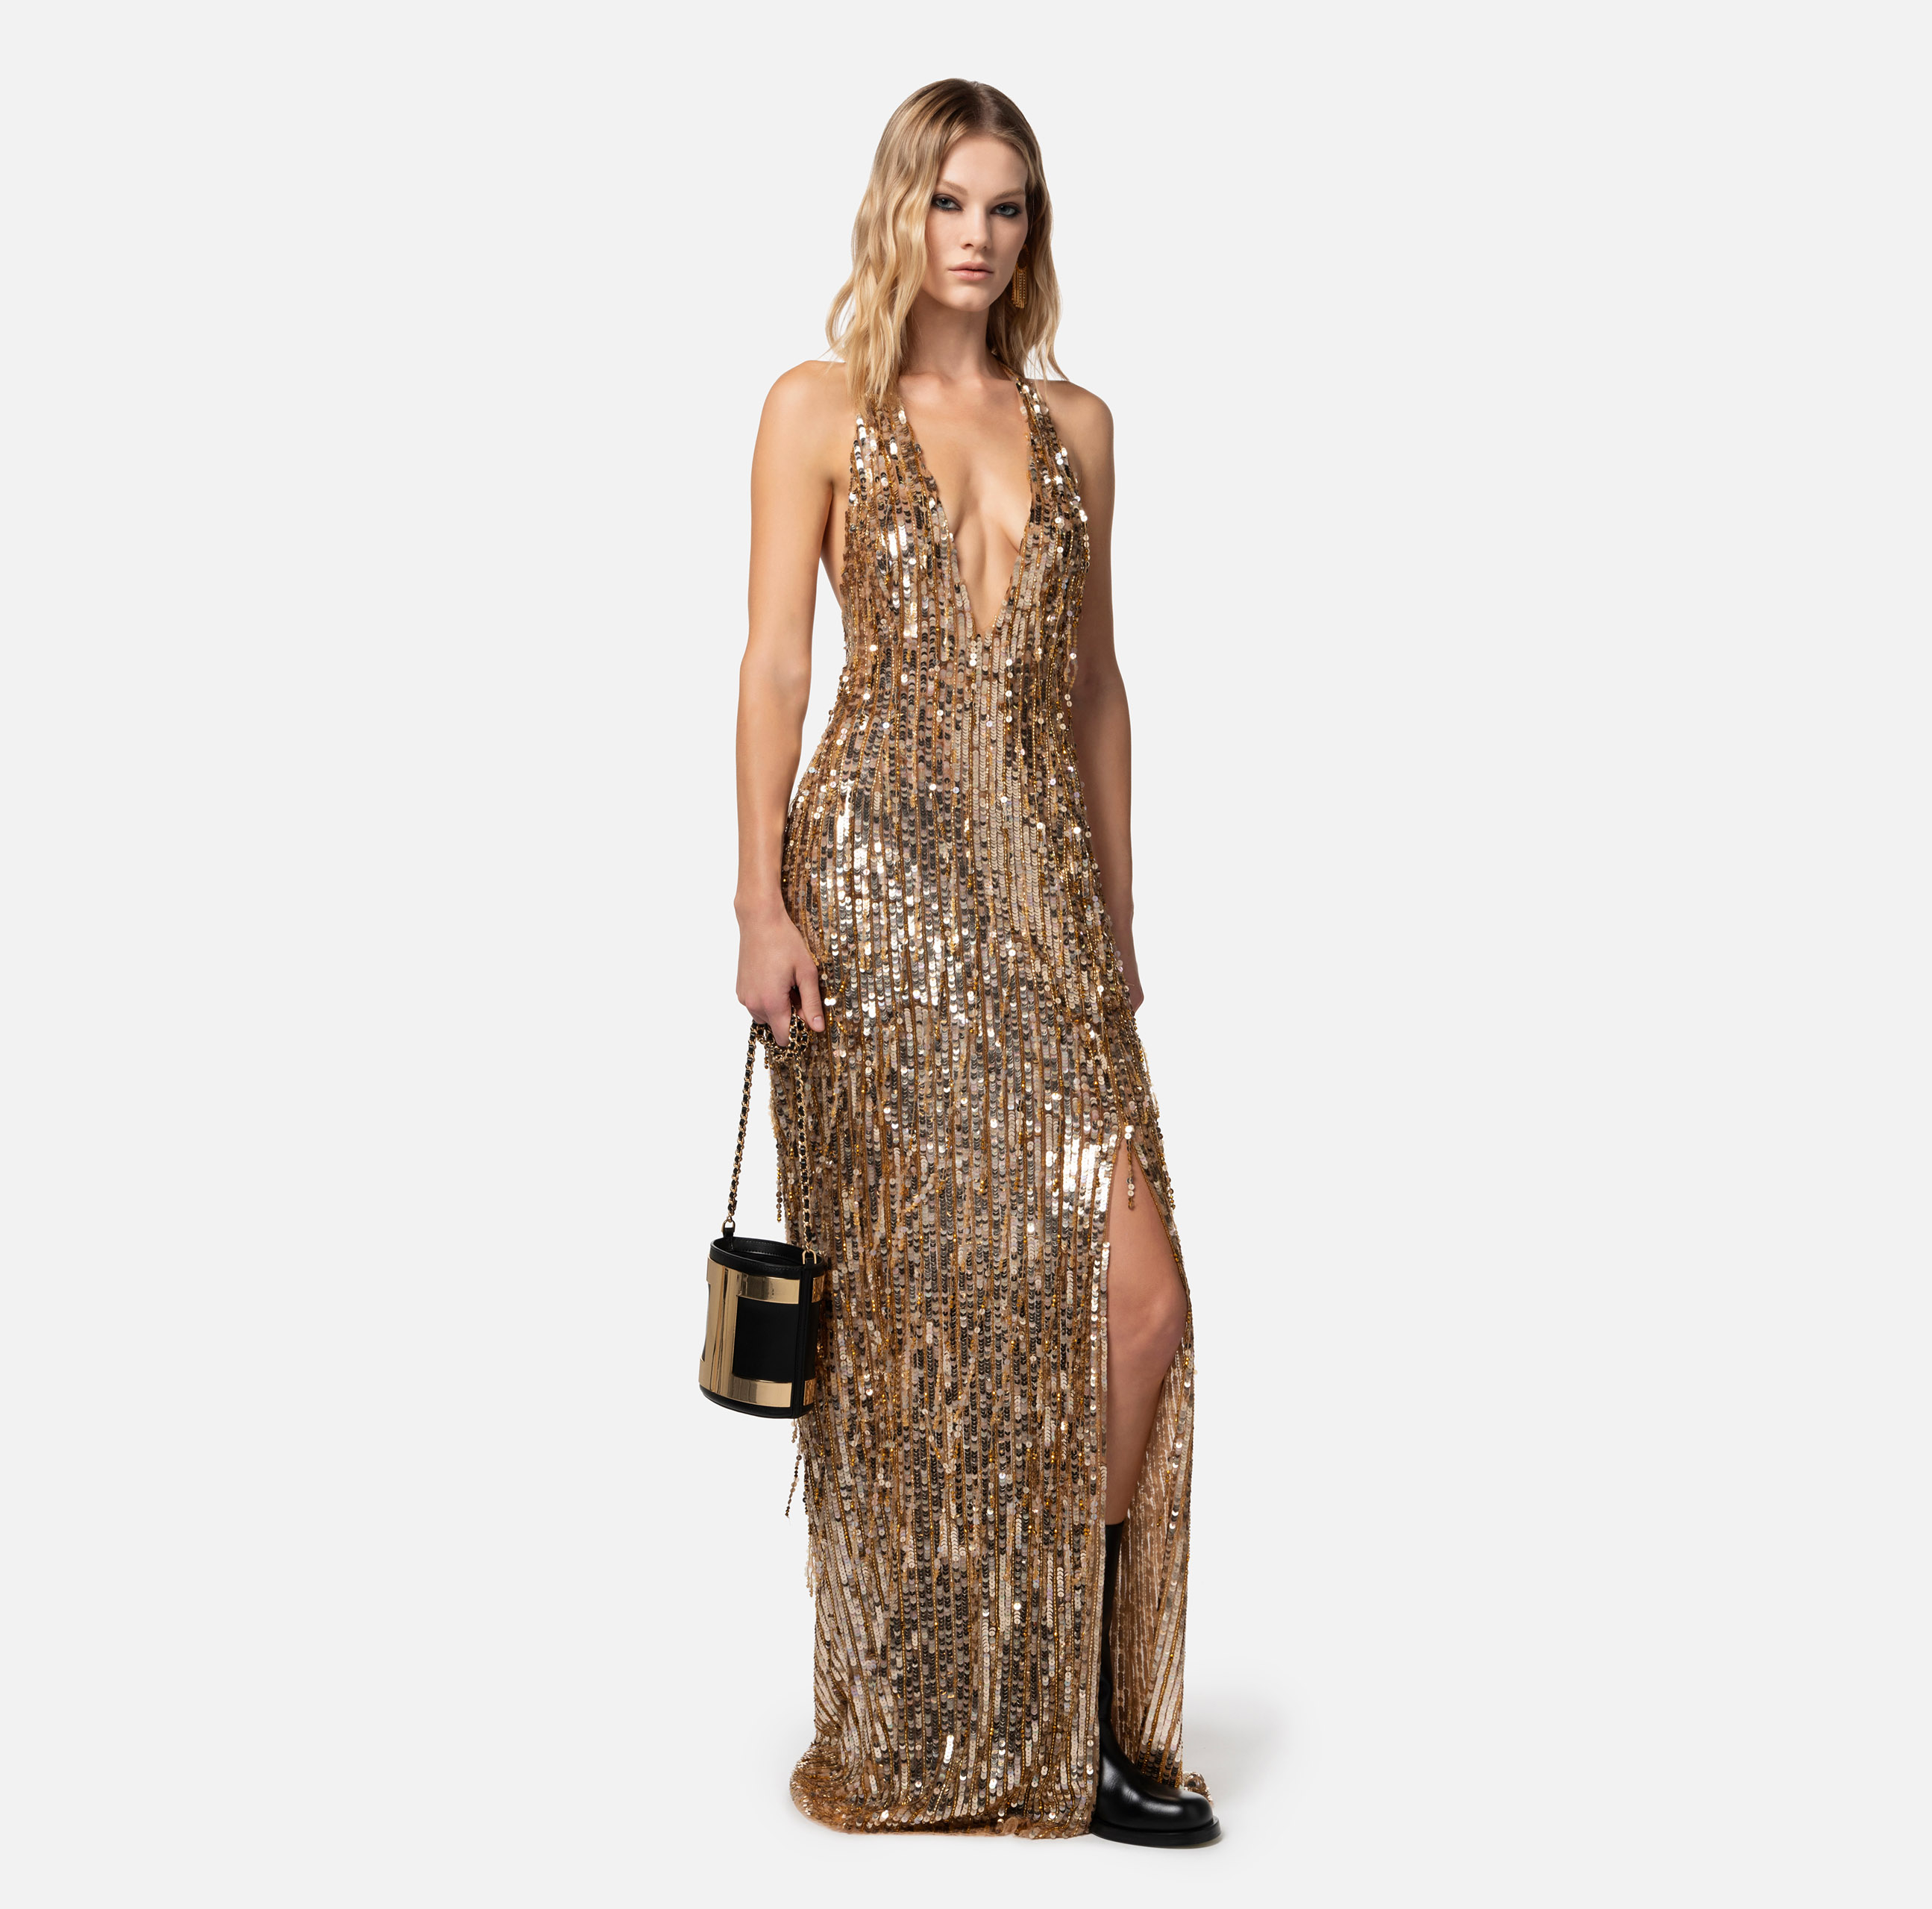 Red carpet dress with fringes made of beads and sequins - Elisabetta Franchi